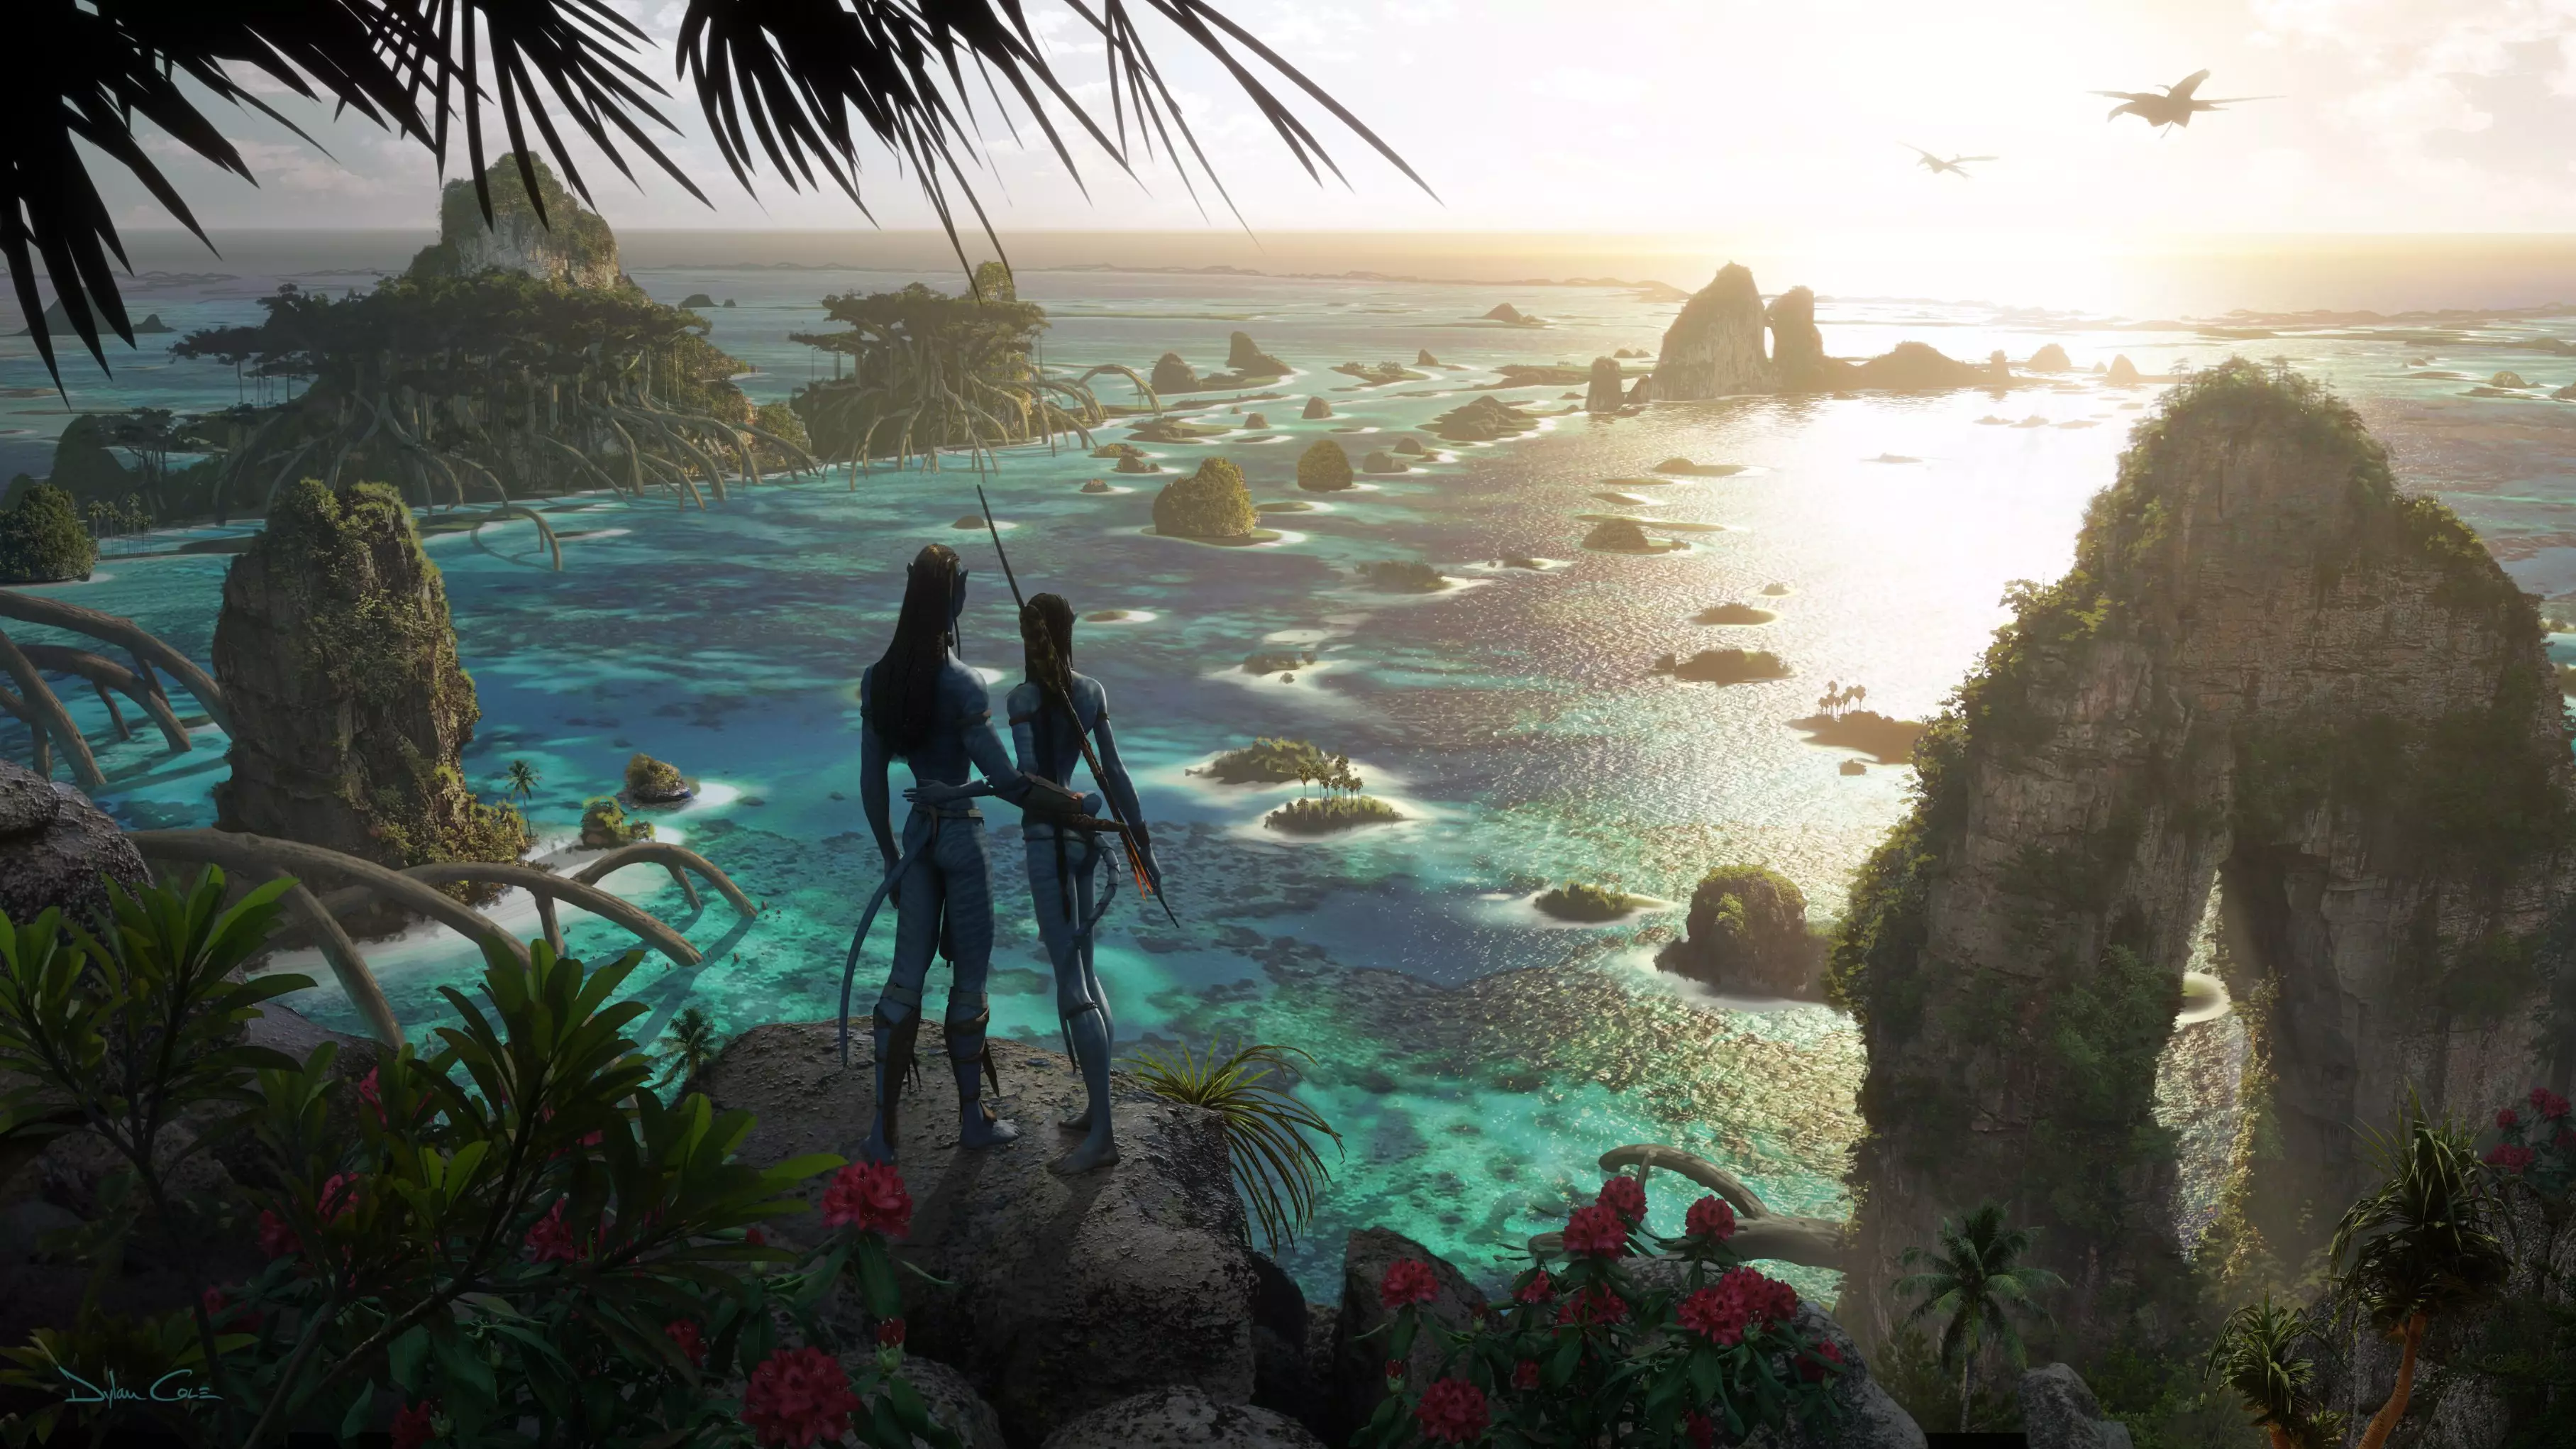 Avatar 2 Is Set To Resume Filming Again In New Zealand